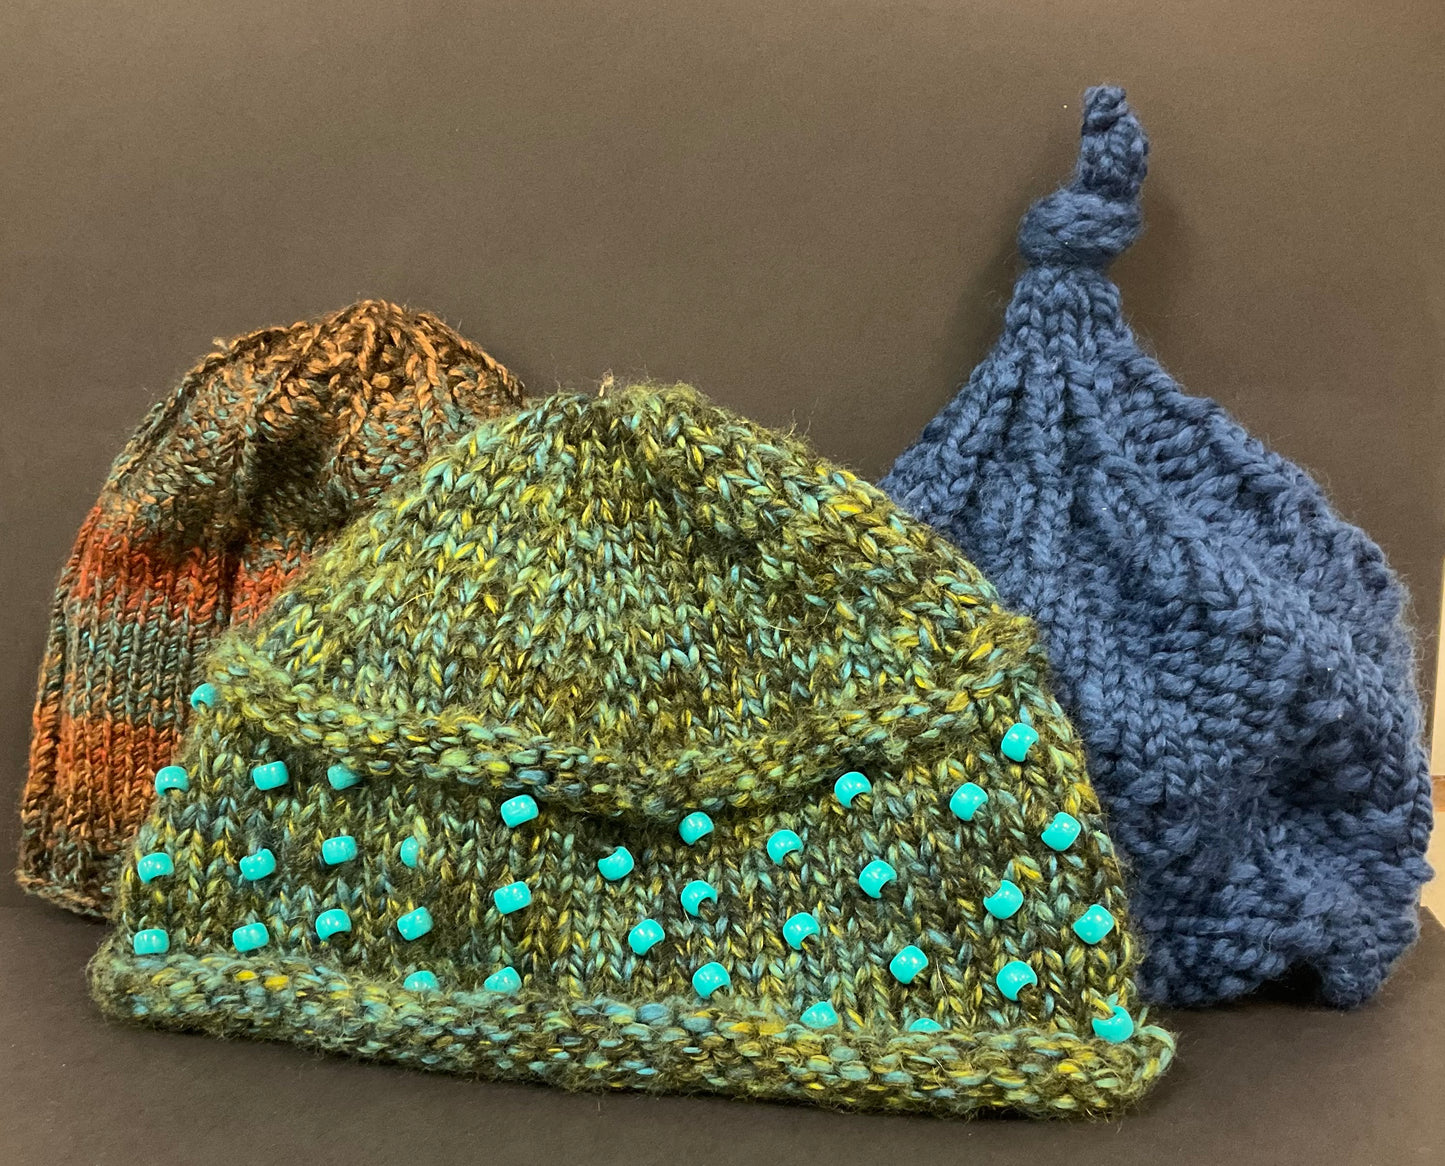 Knitted Caps - Alison Brant